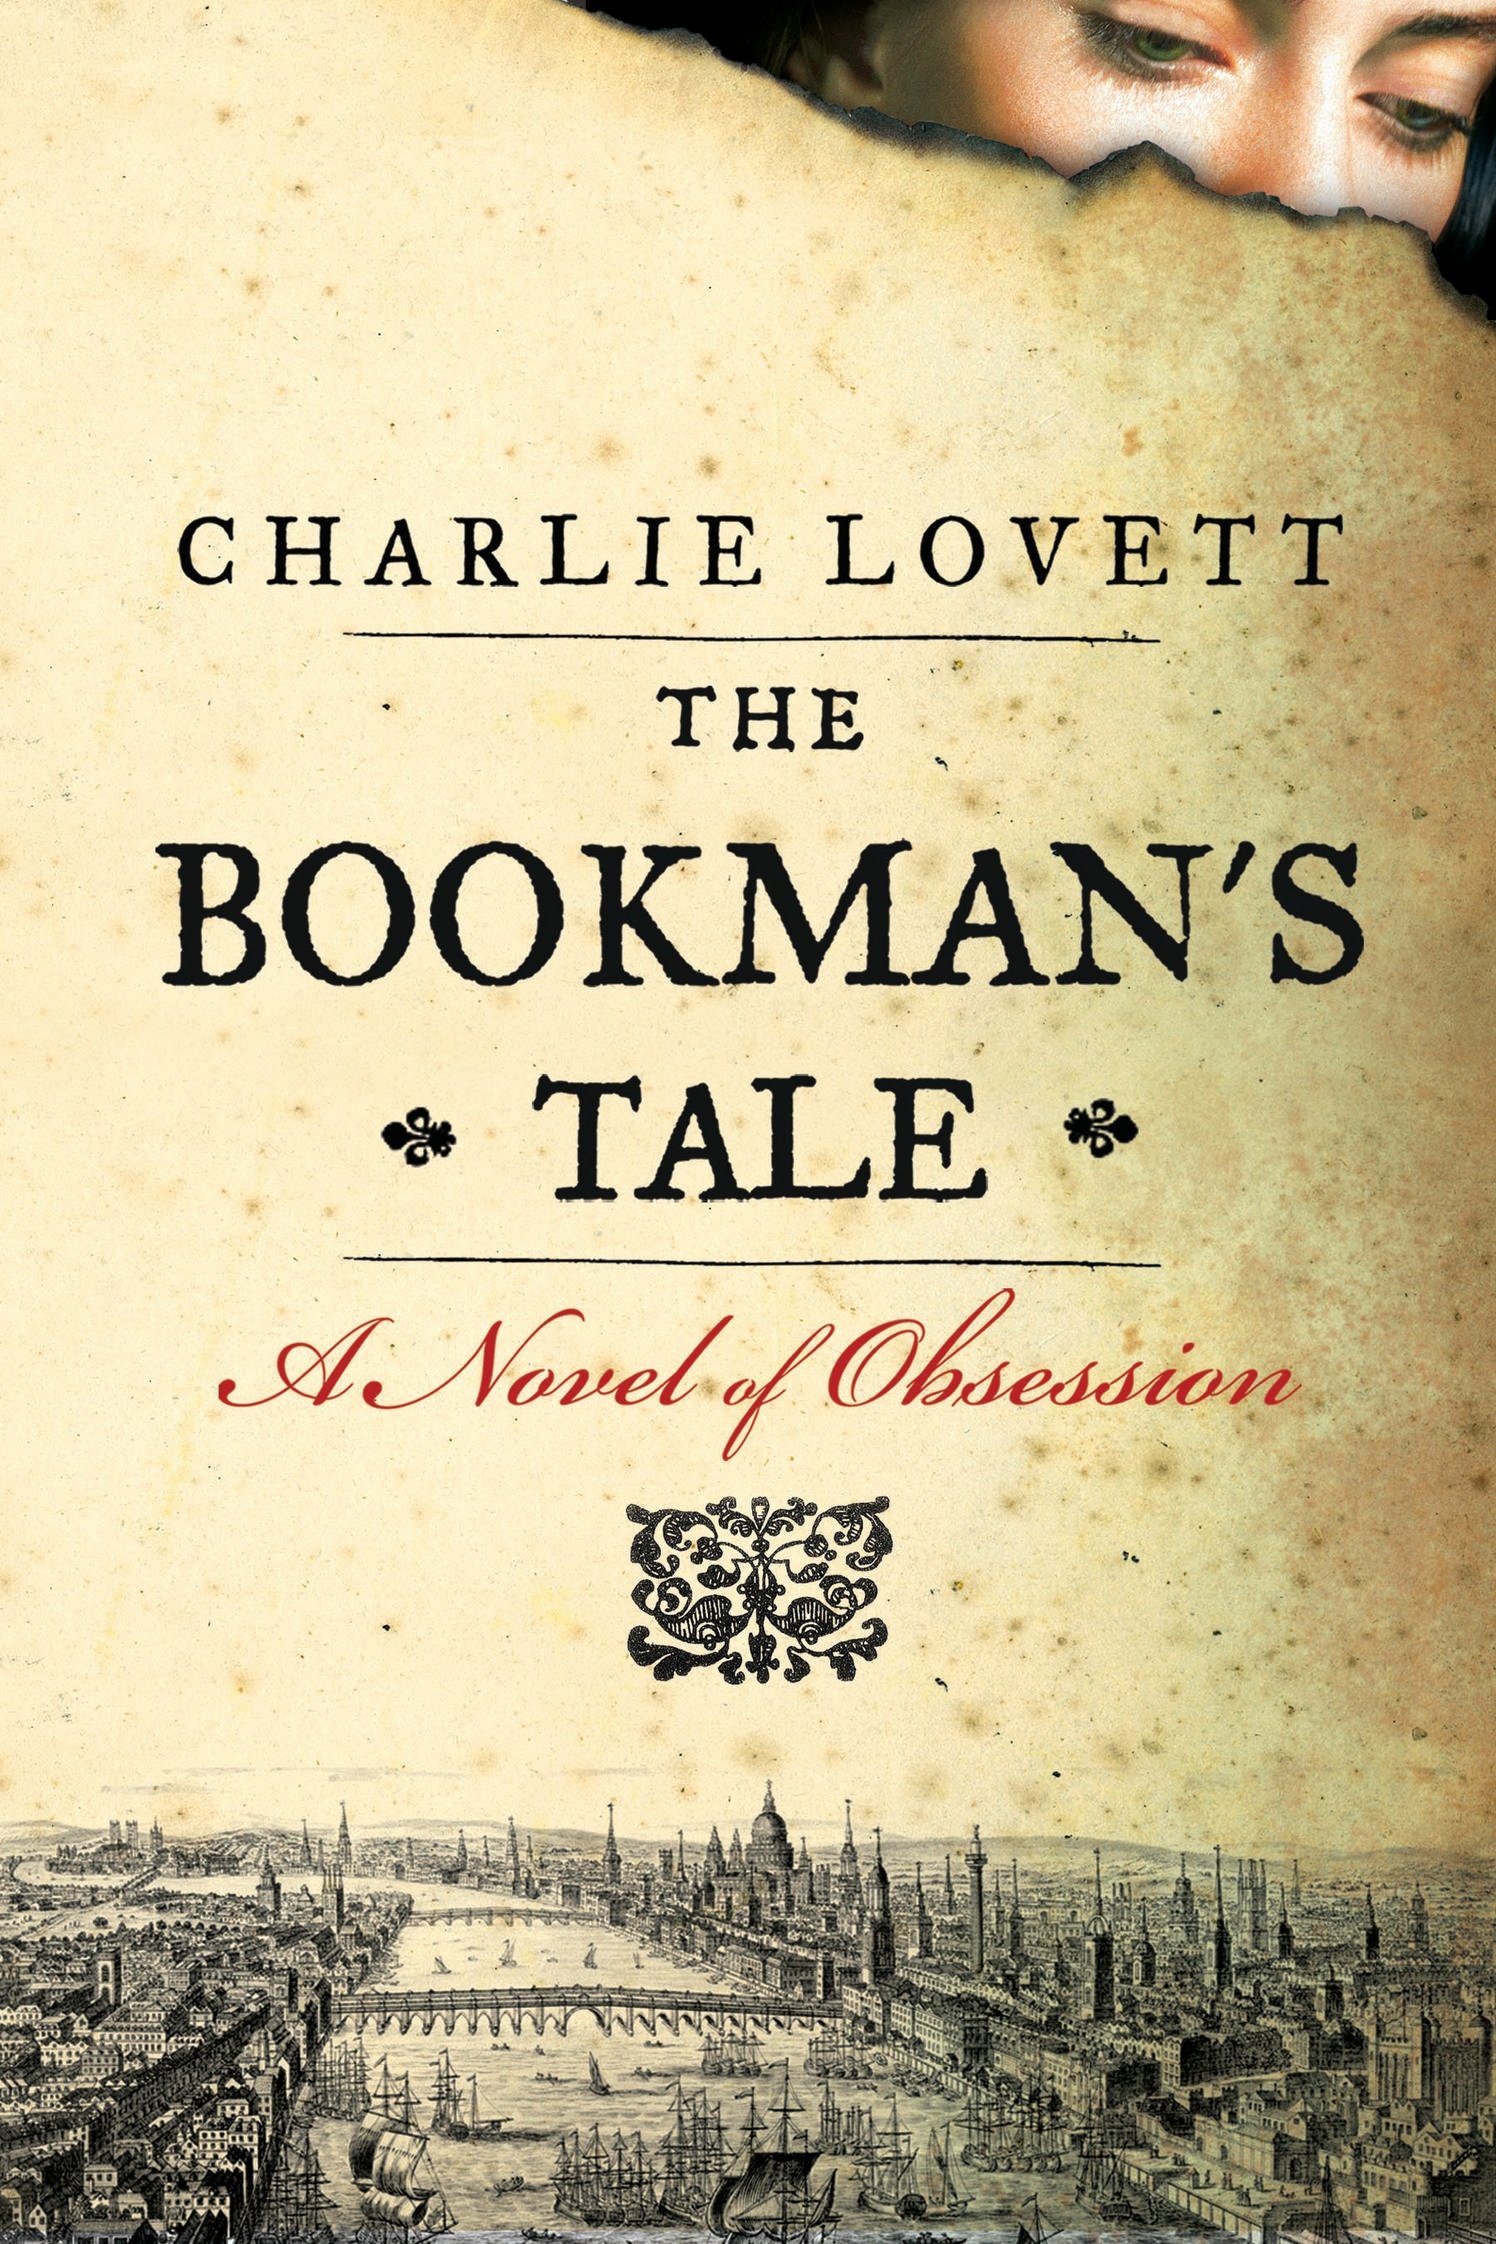 GIVEAWAY: THE BOOKMAN'S TALE by Charlie Lovett